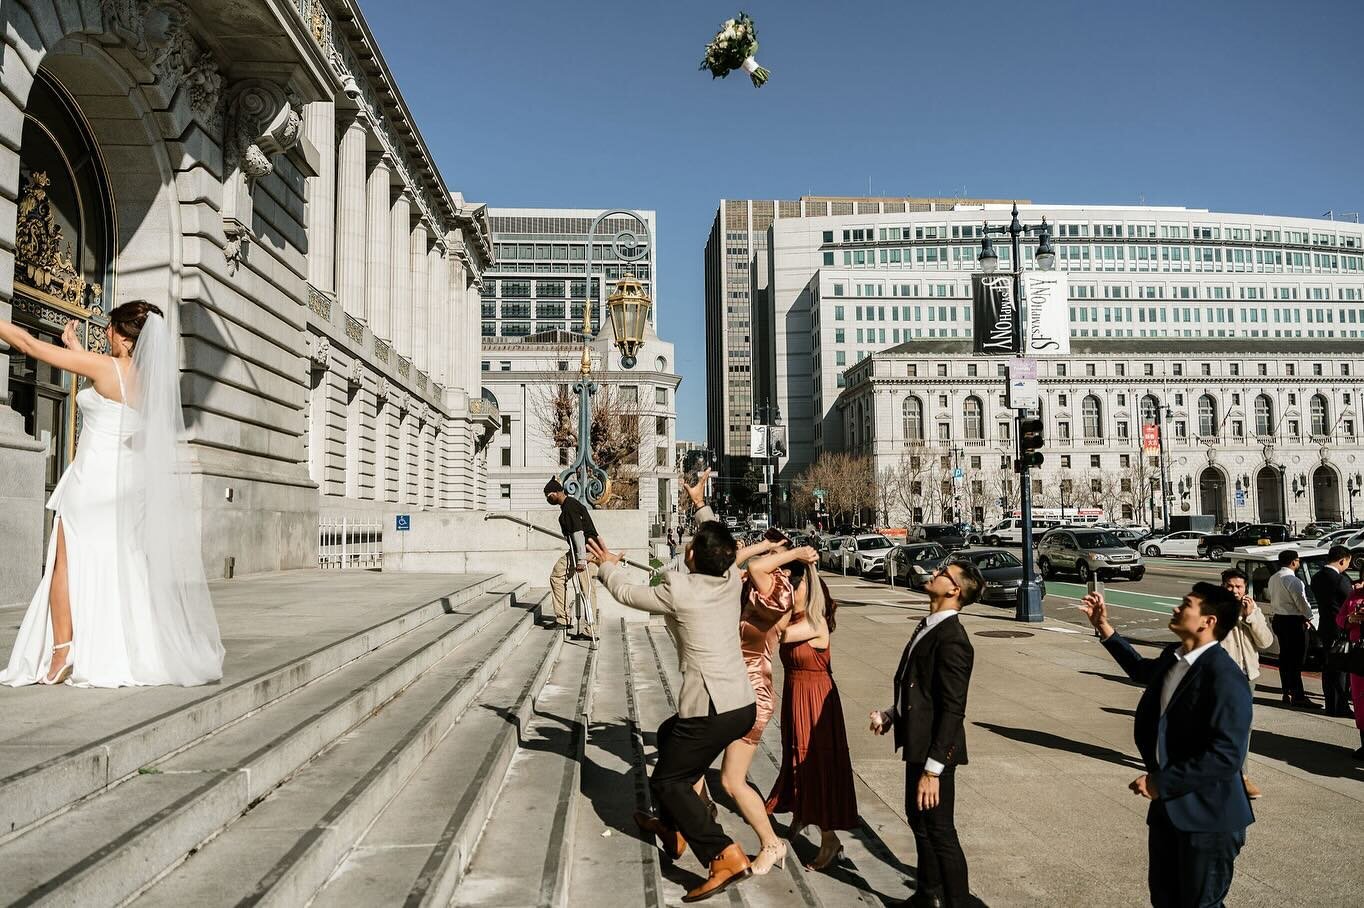 I finally blogged this San Francisco City Hall elopement! 

During this couple's elopement there were a few areas that were closed off due to an event being set up for later that night, but we made full use of what we could AND since they booked more